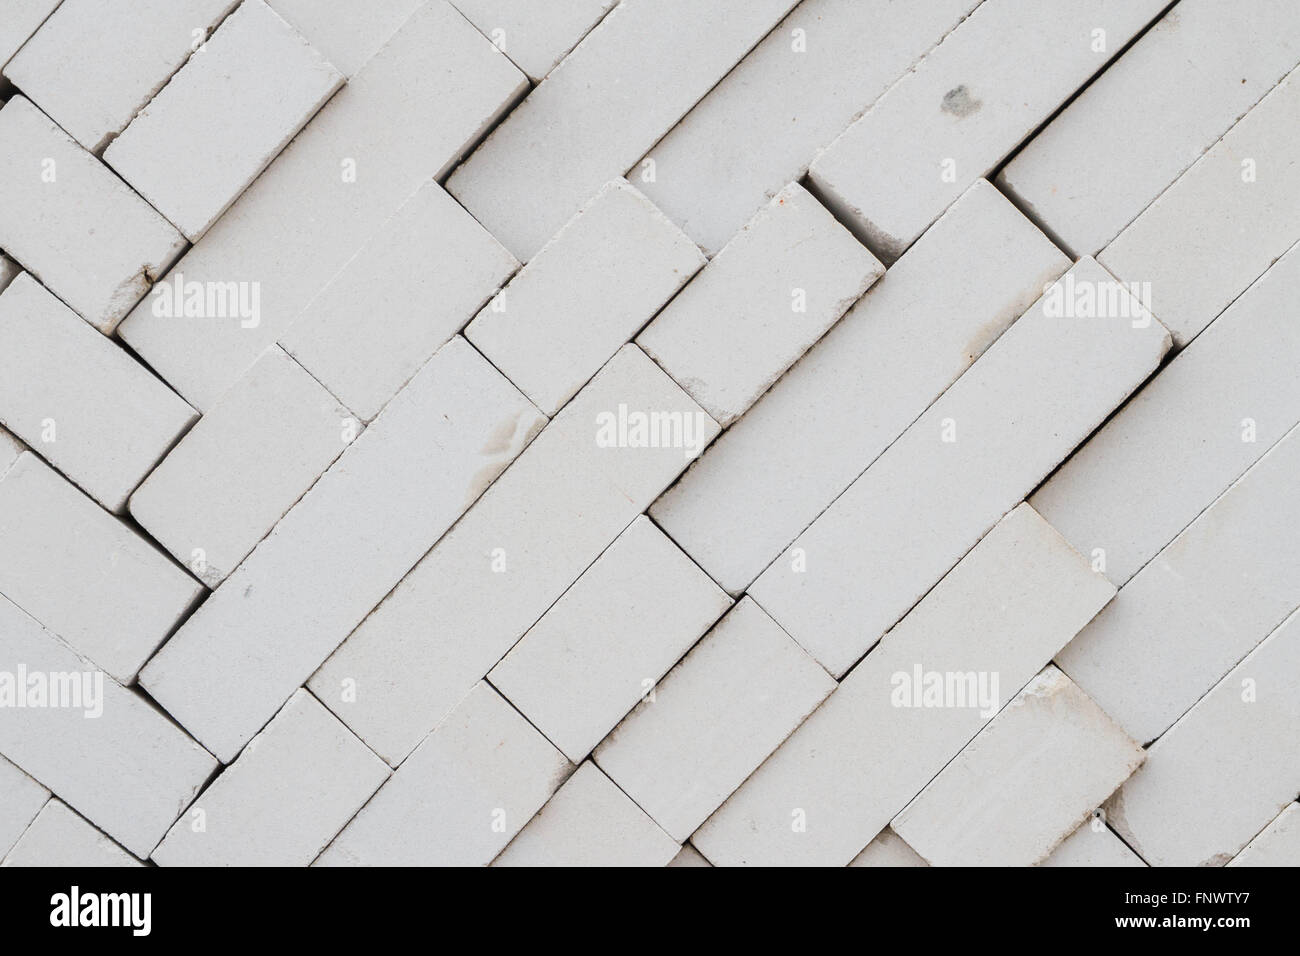 Bricks stacked in a warehouse building base Stock Photo